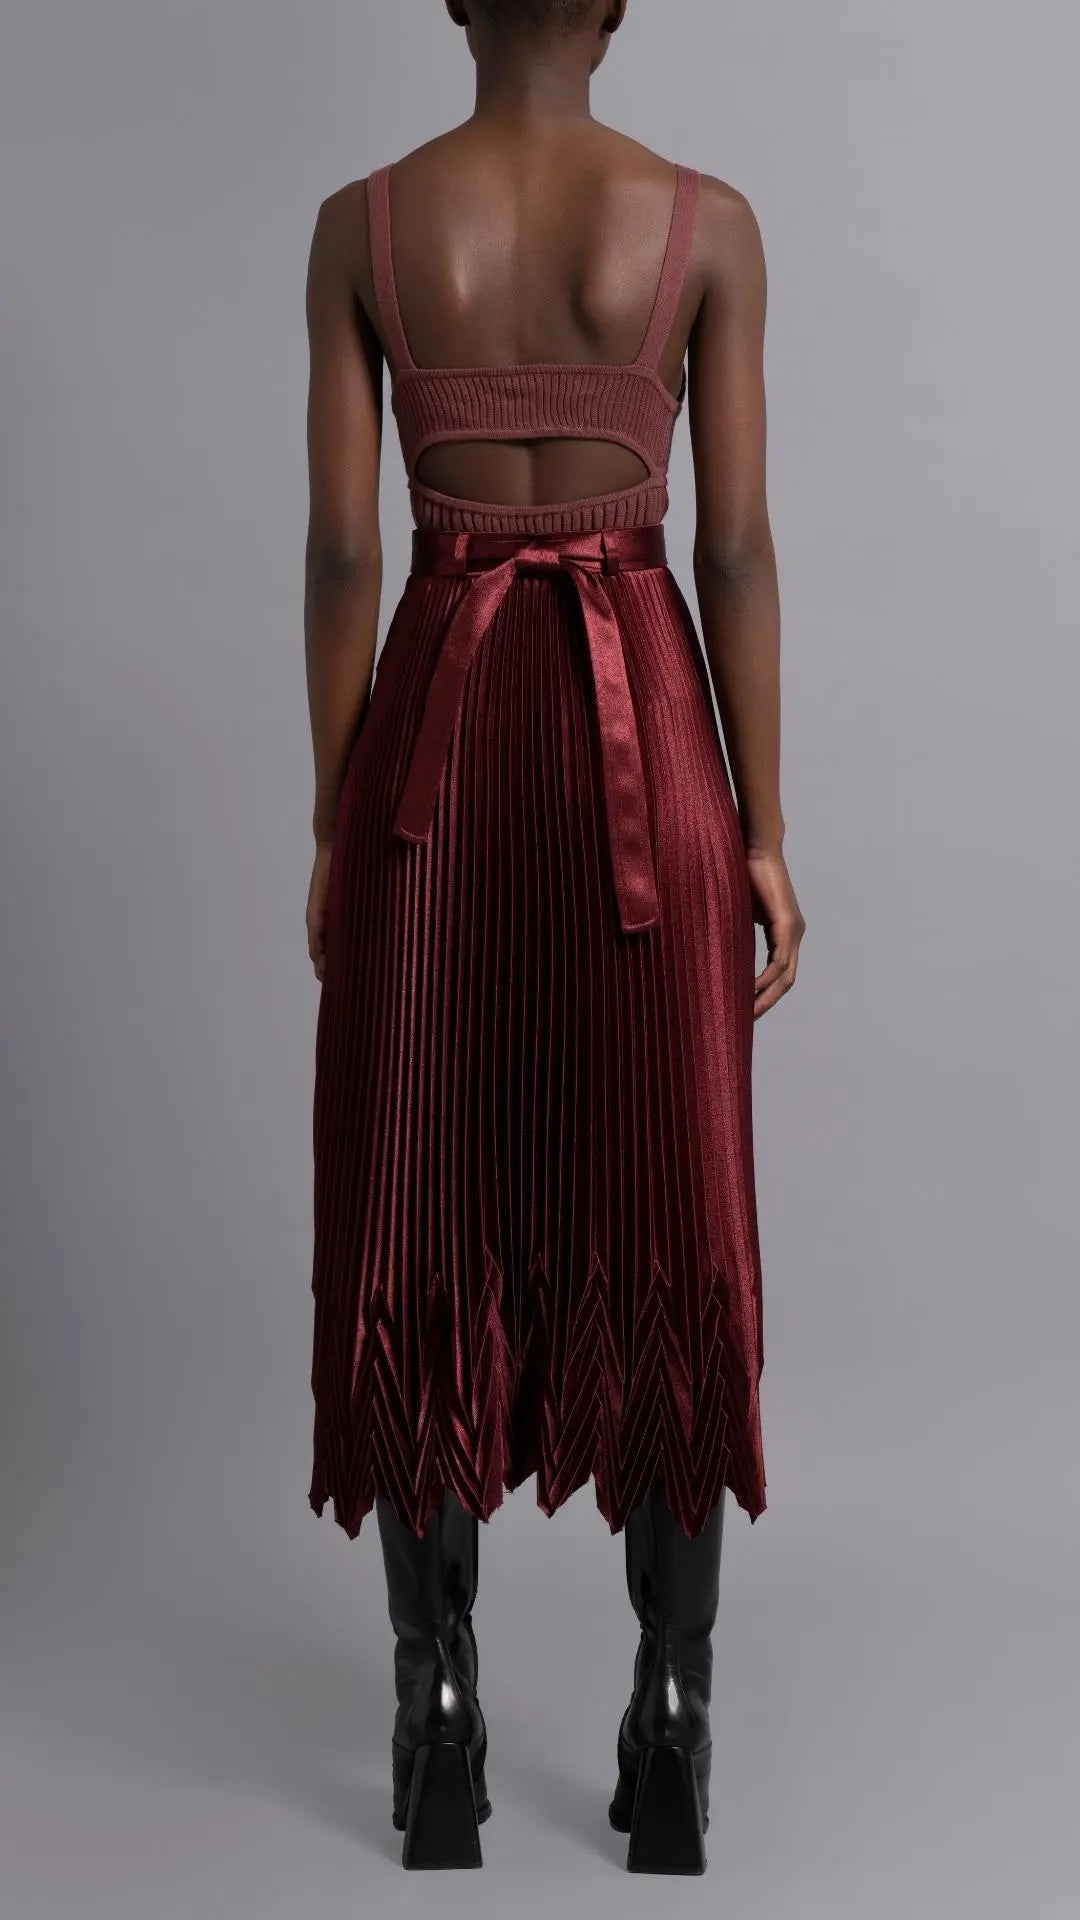 Thebe Magugu Chevron Pleated Skirt in a rich burgundy color. Fitted at the waist with straight pleats it falls into a double chevron pleat bottom. Long in length. It comes with a tie belt. Shown on model facing back.